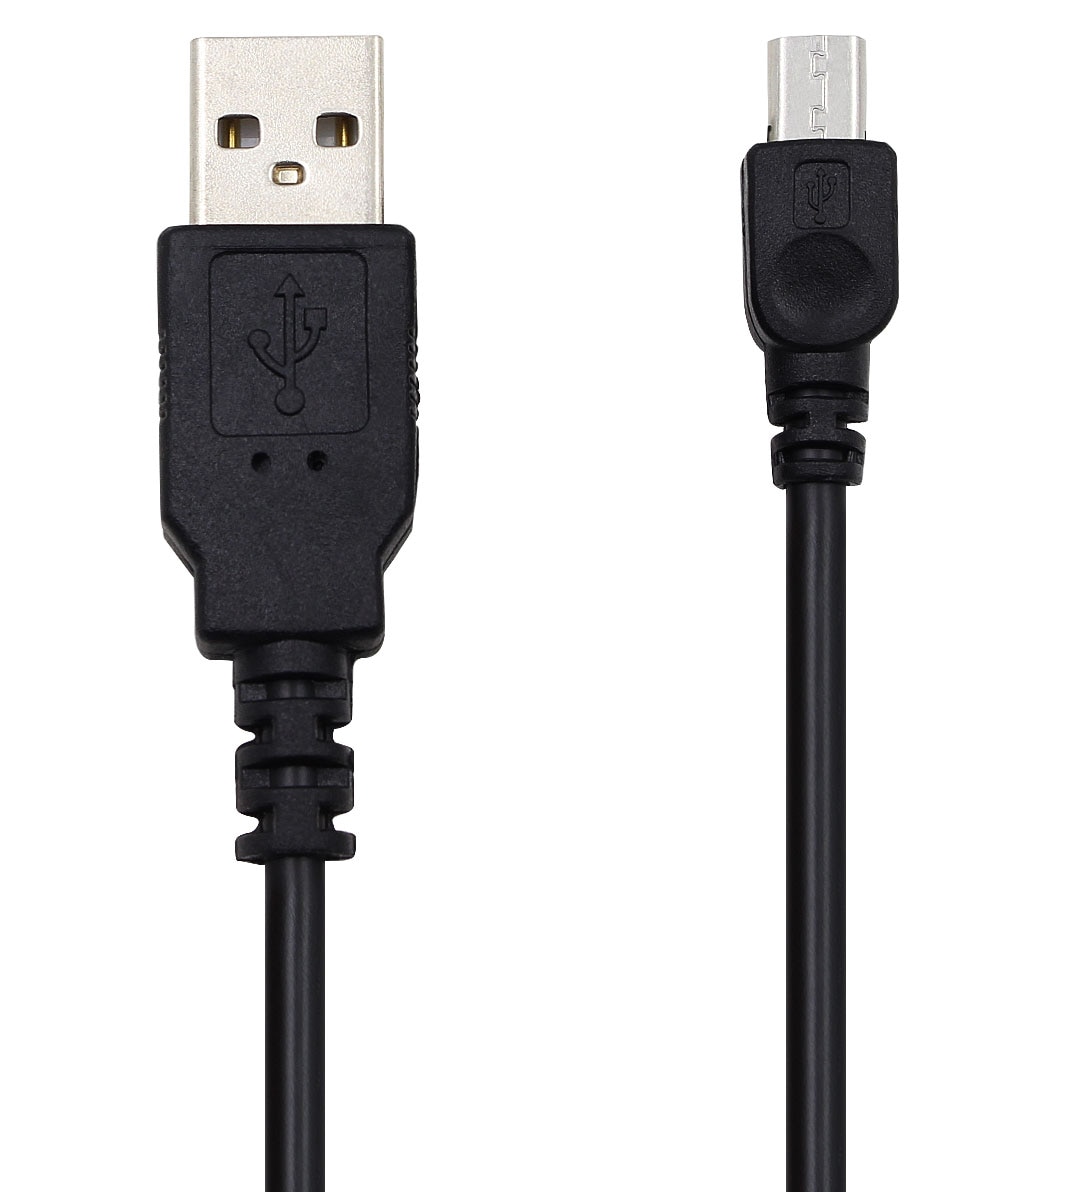 Usb Data Sync Charger Cable Koord Voor Kobo E-Book Reader Ereader